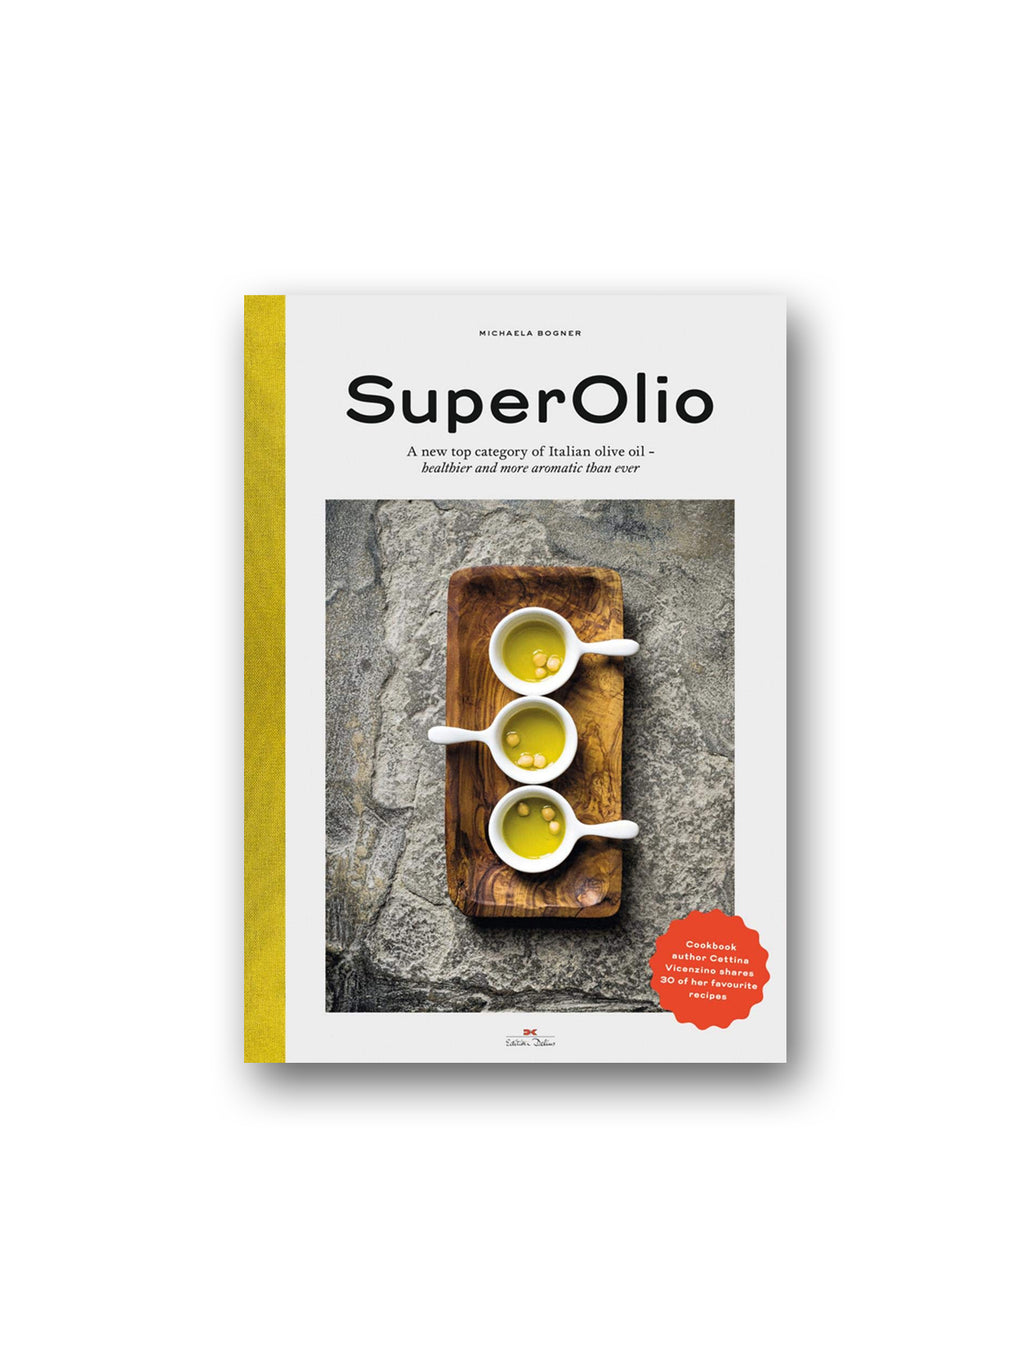 Super Olio : A New Top Category of Italian Olive Oil - Healthier and More Aromatic Than Ever